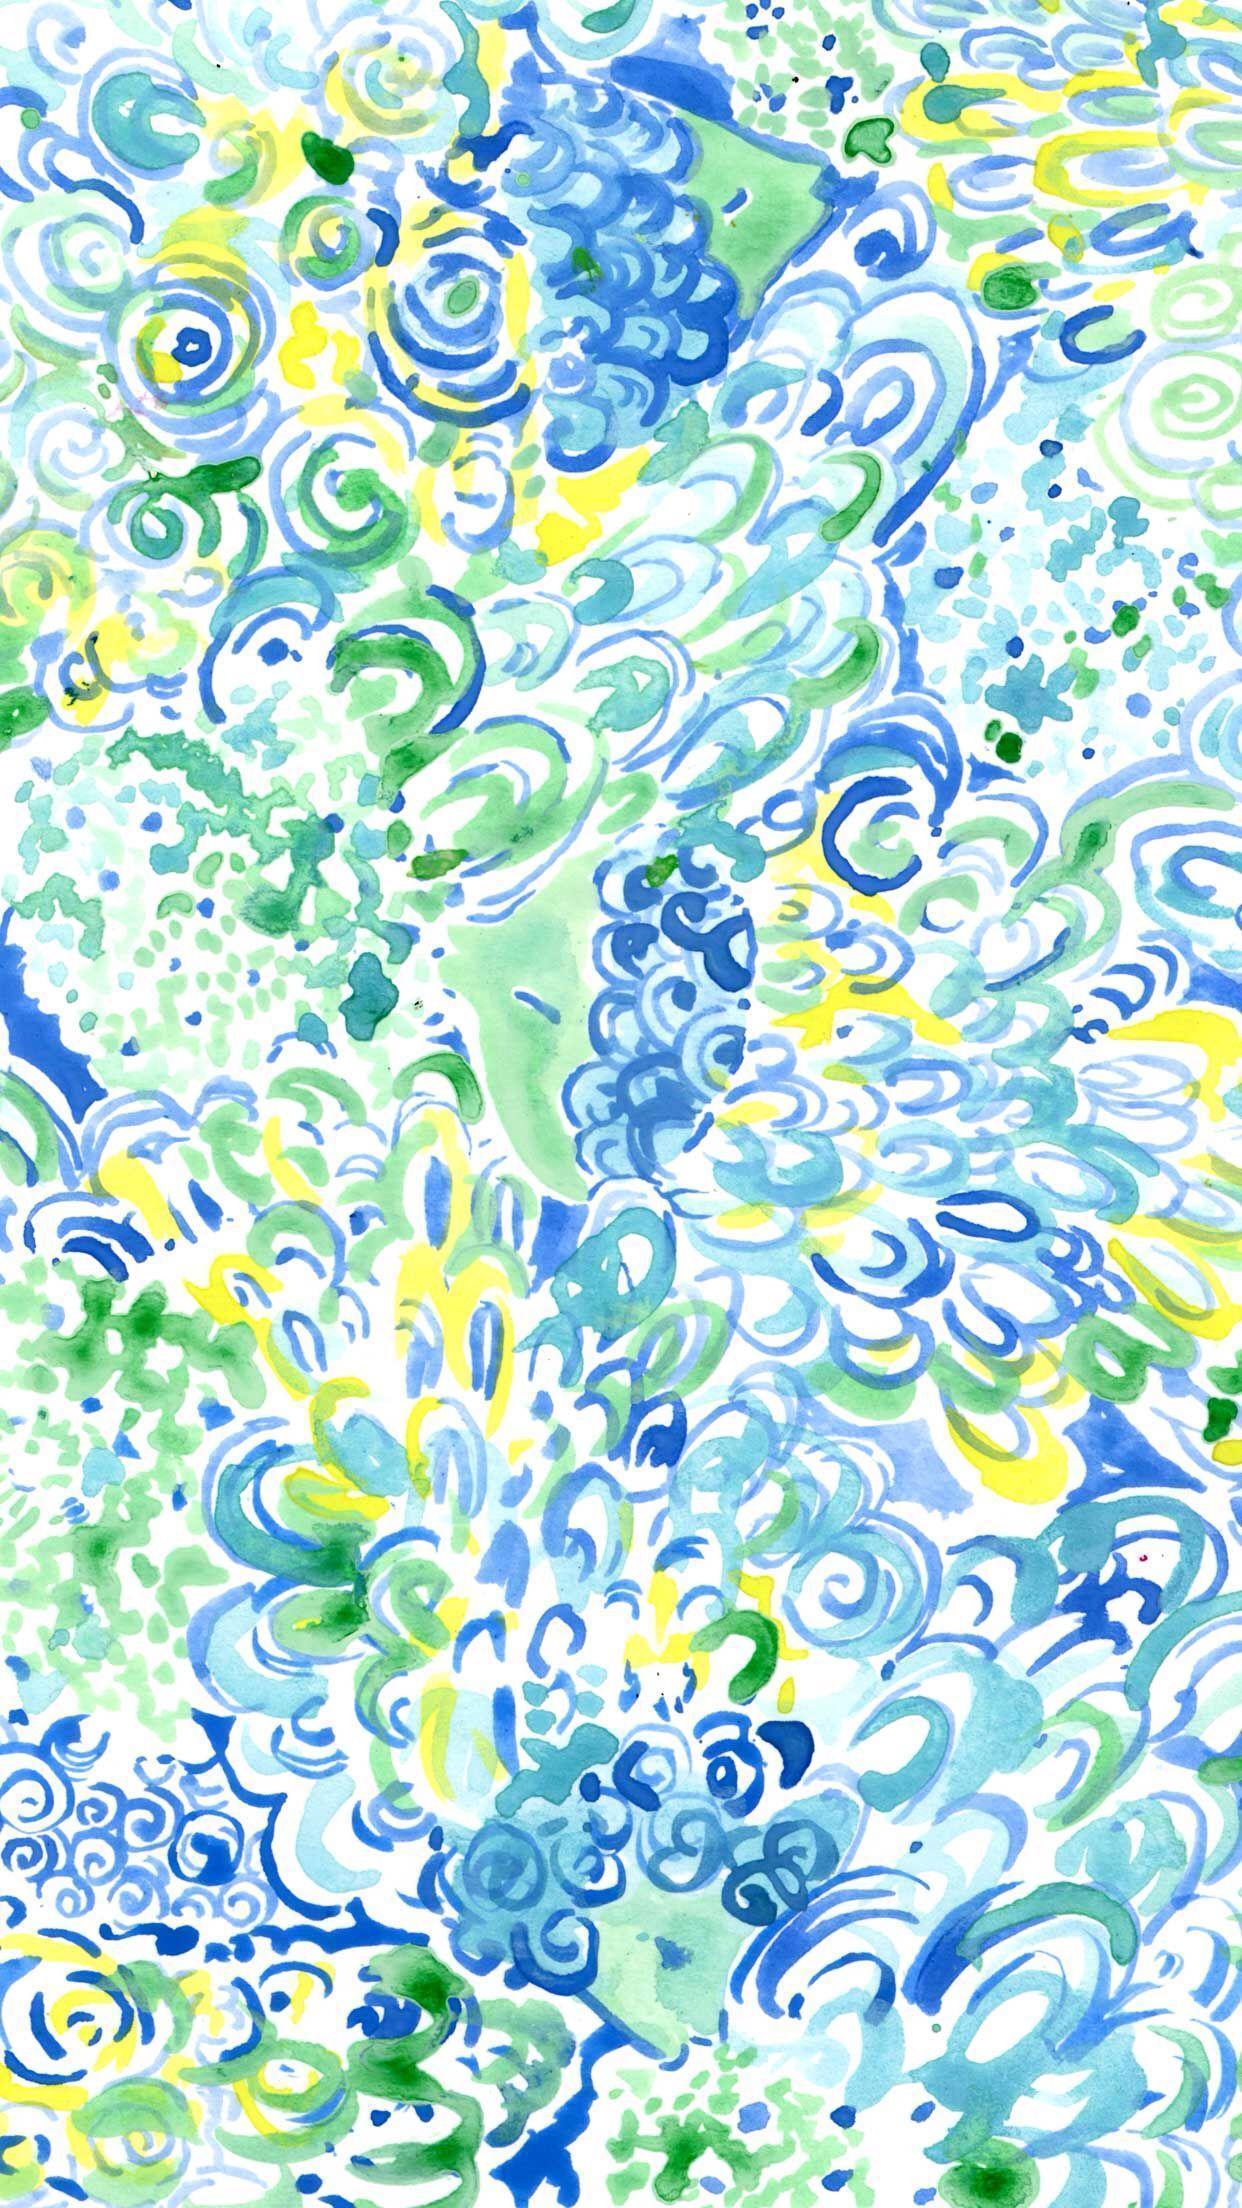 Let there be silence while this Lilly Pulitzer print does